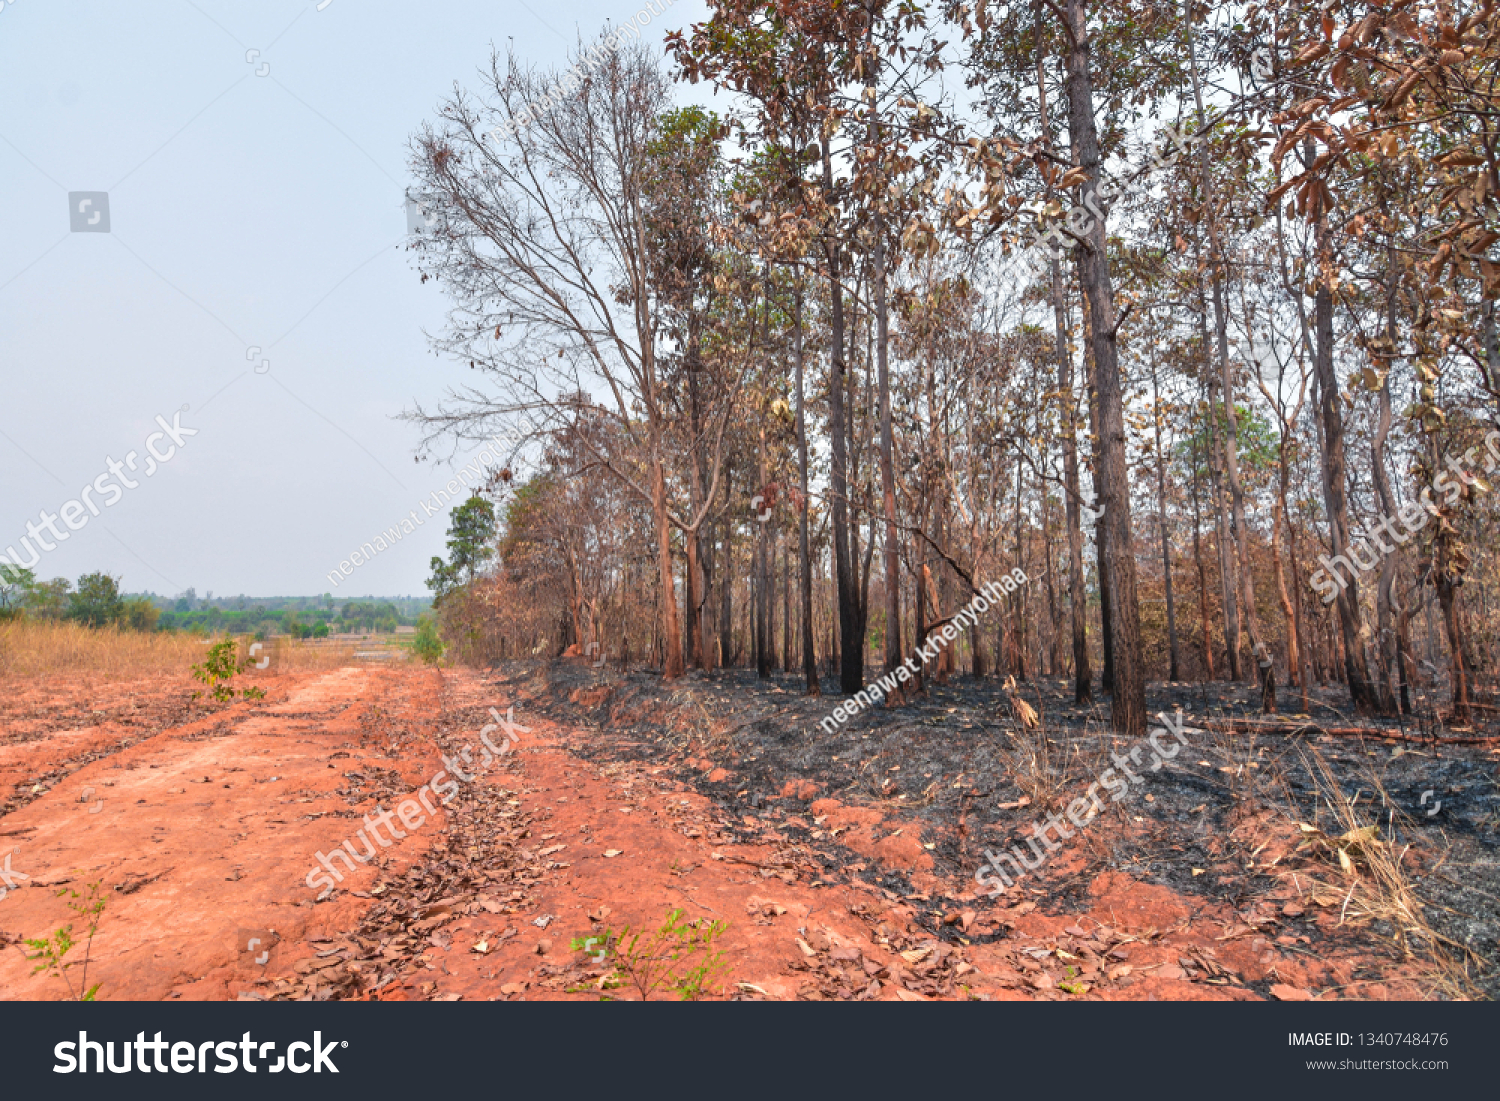 Fires, deciduous forests, mixed deciduous forests during the dry season of Southeast Asia
 #1340748476